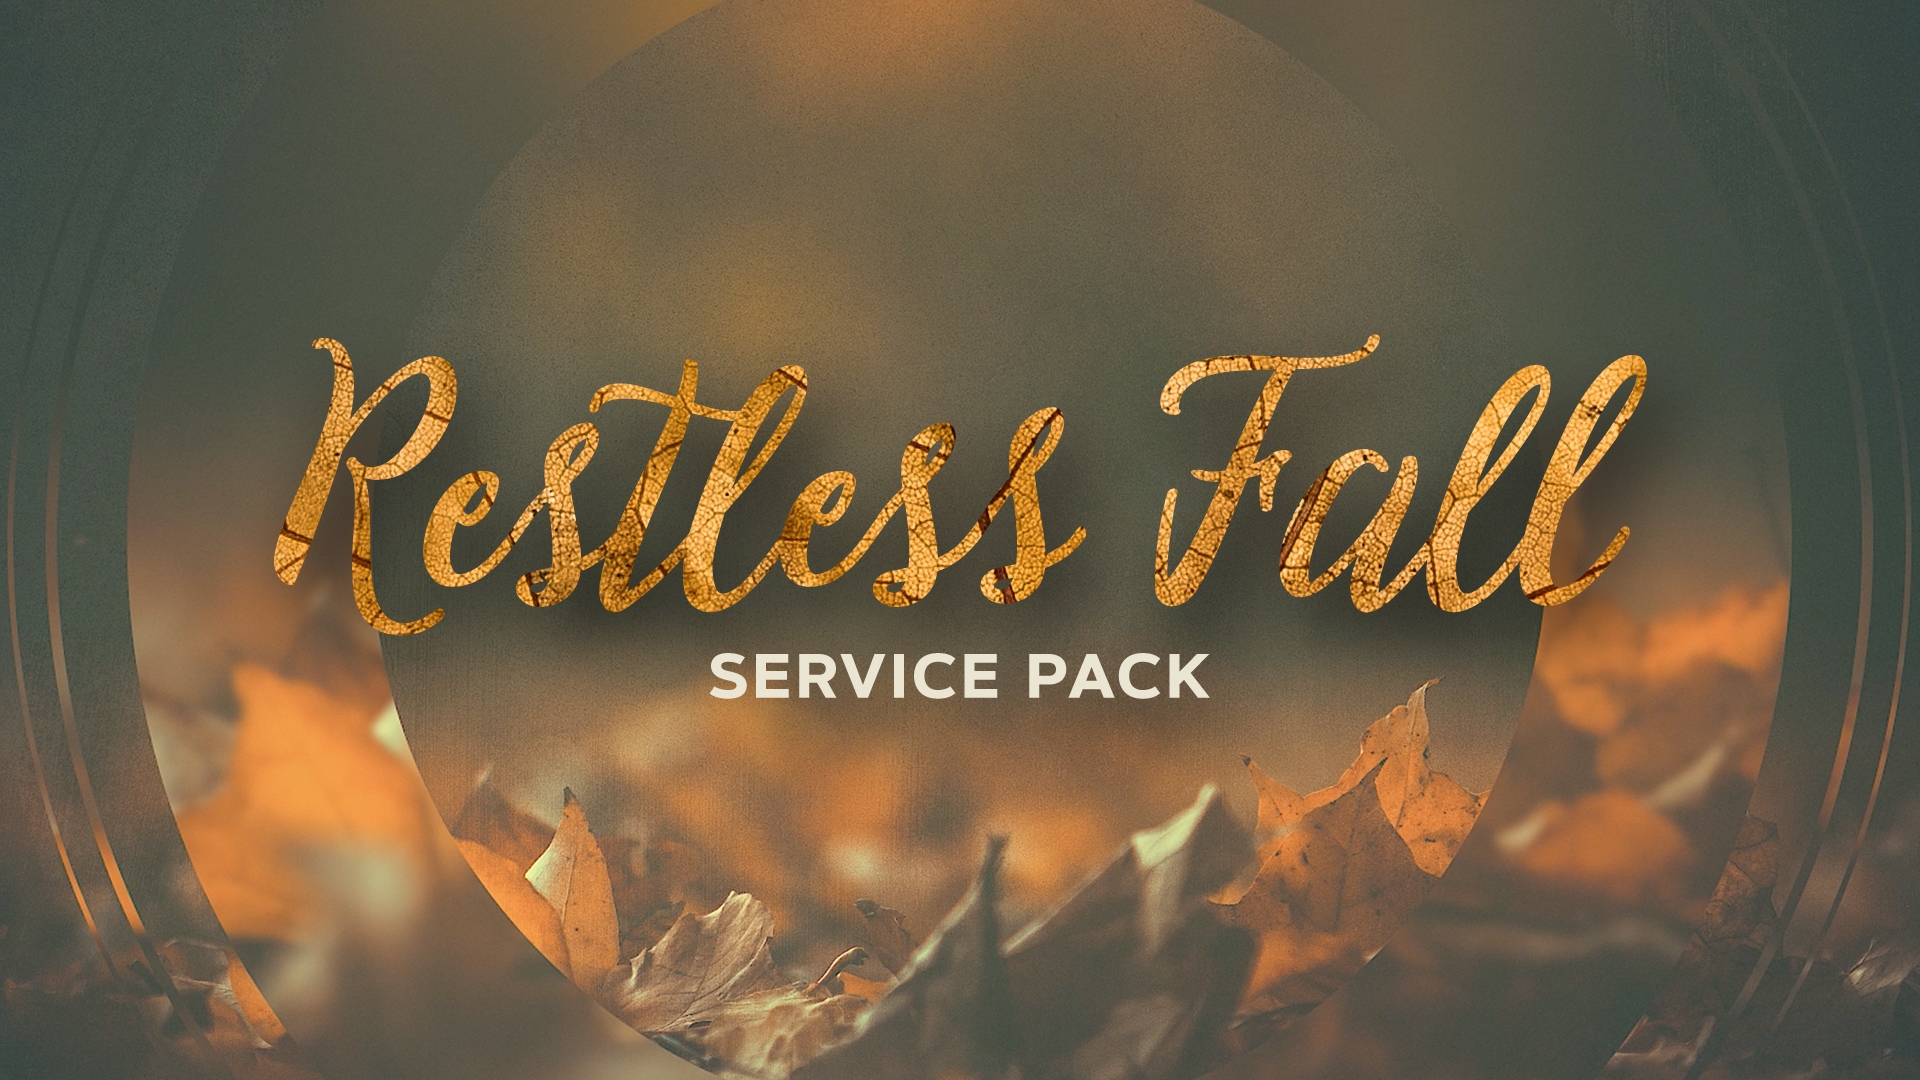 Restless Fall Service Pack